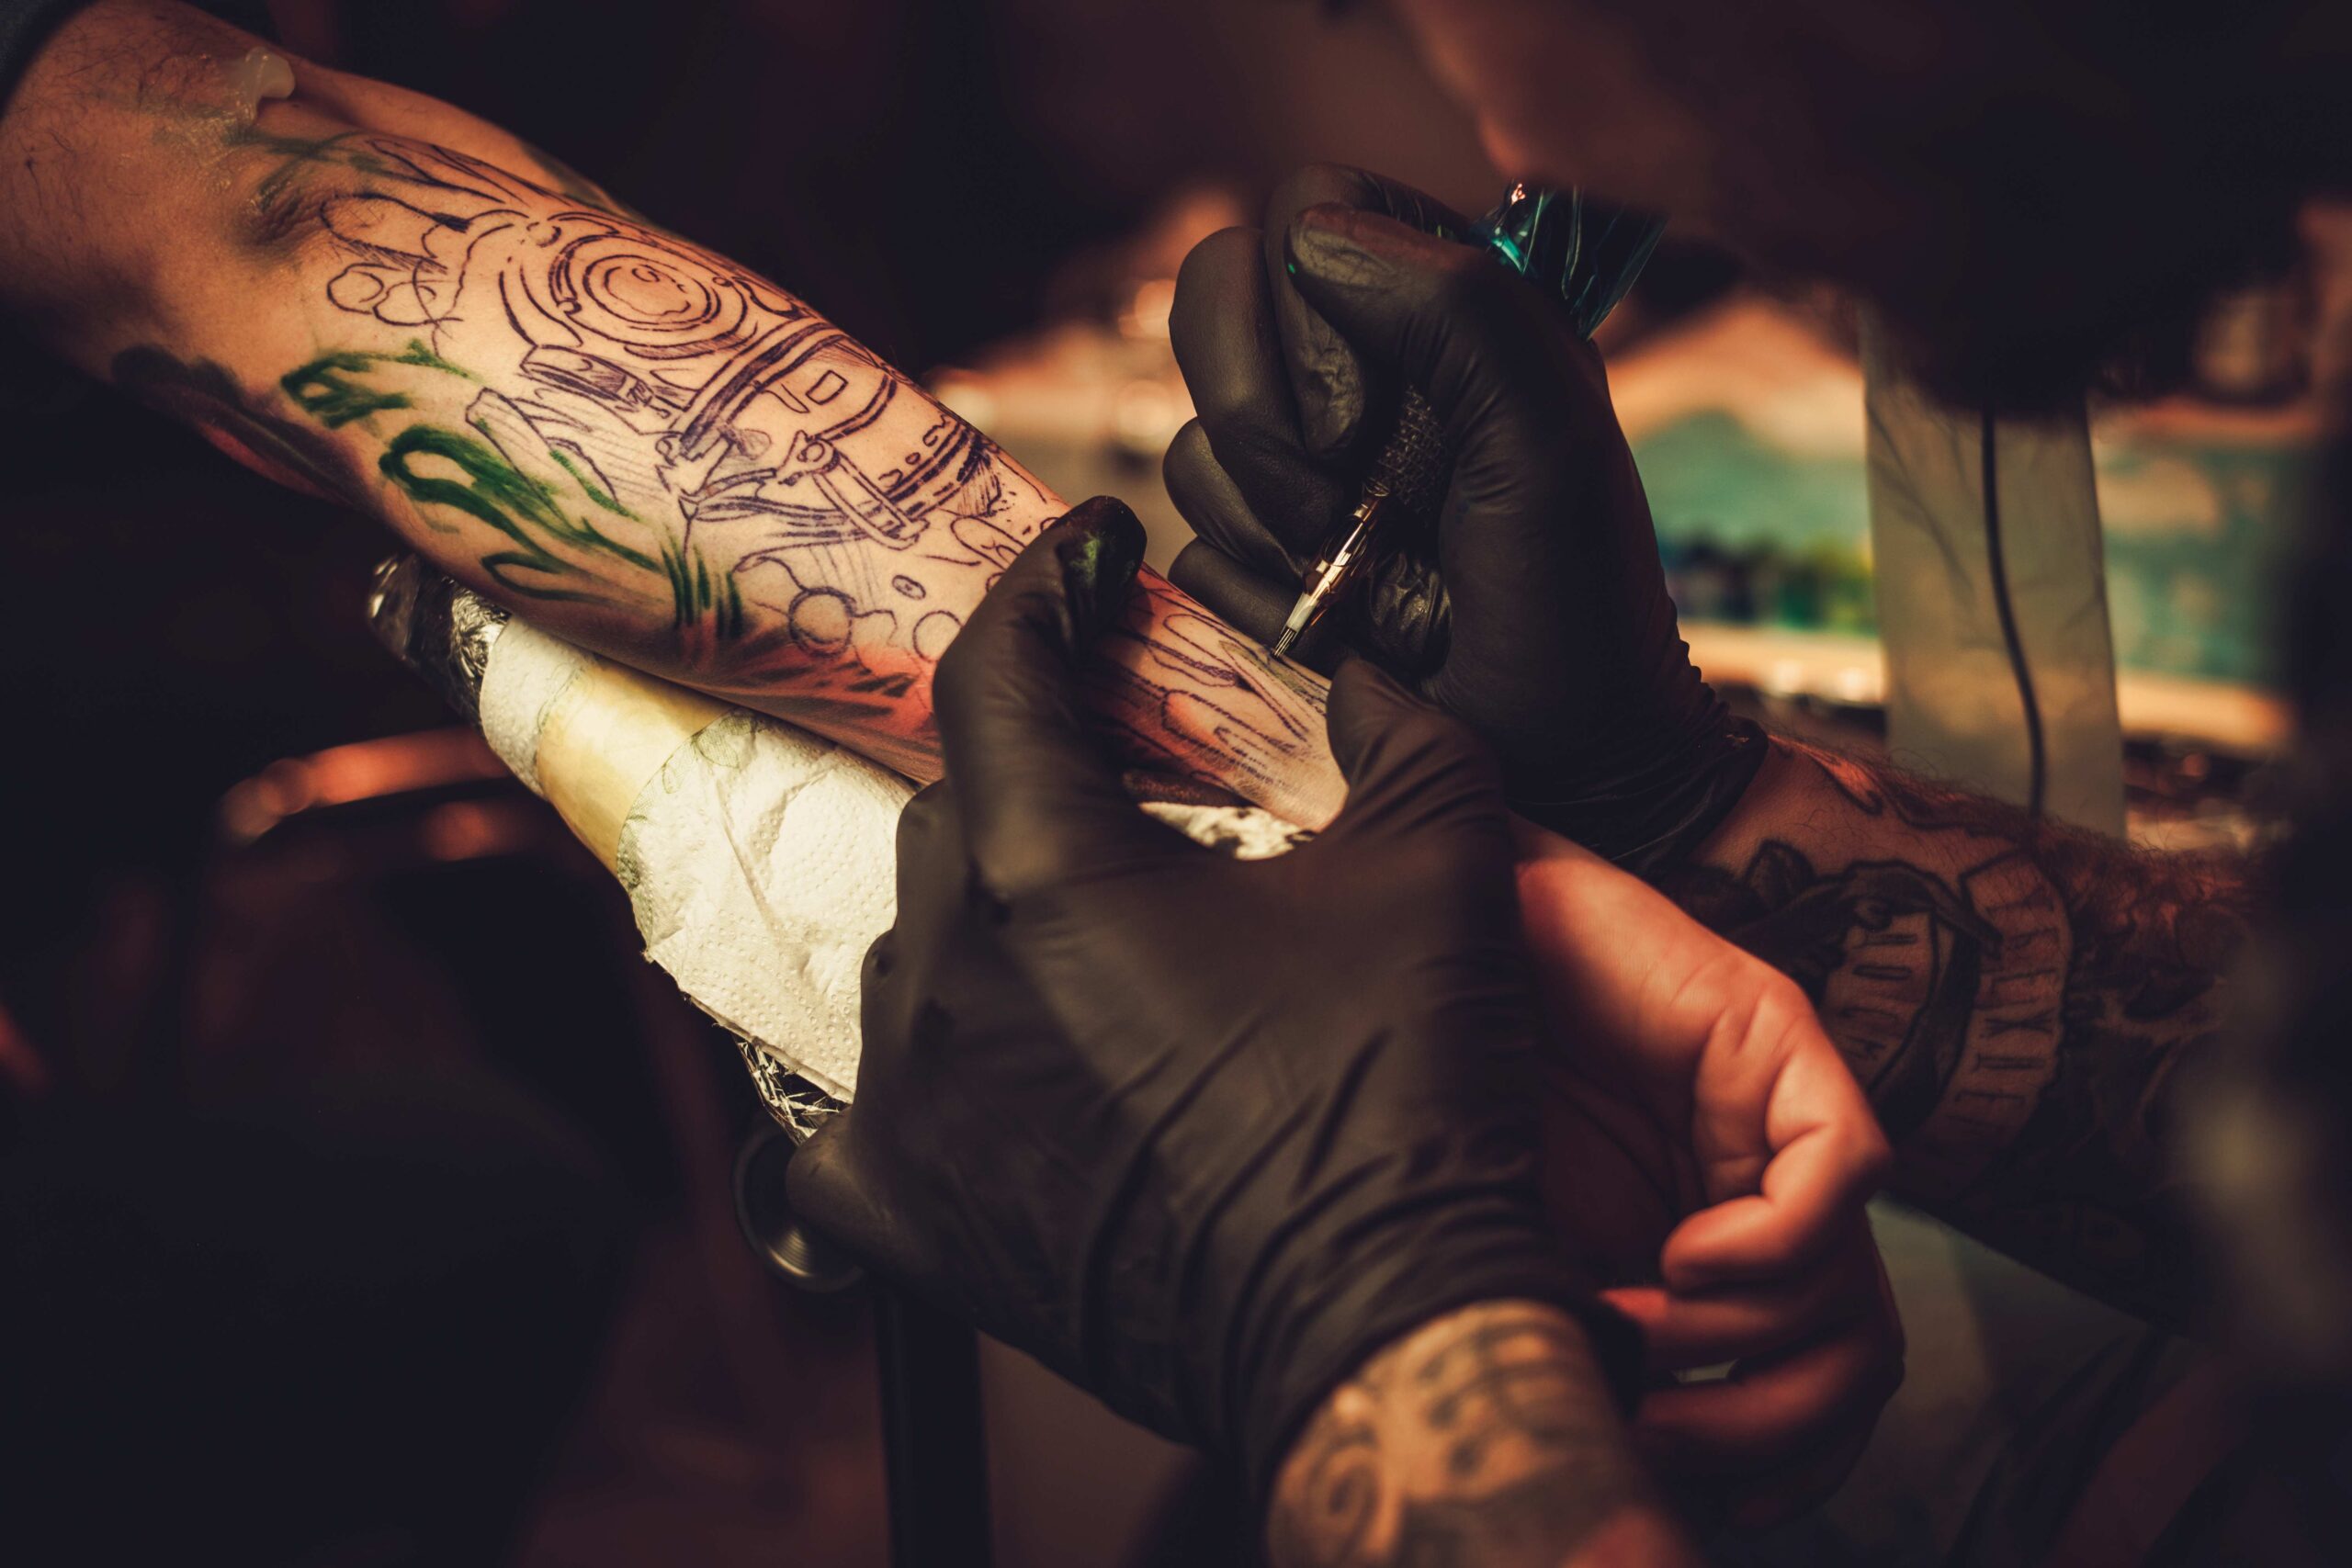 Permanent Tattoo Services at Rs 500/square inch in Gurgaon